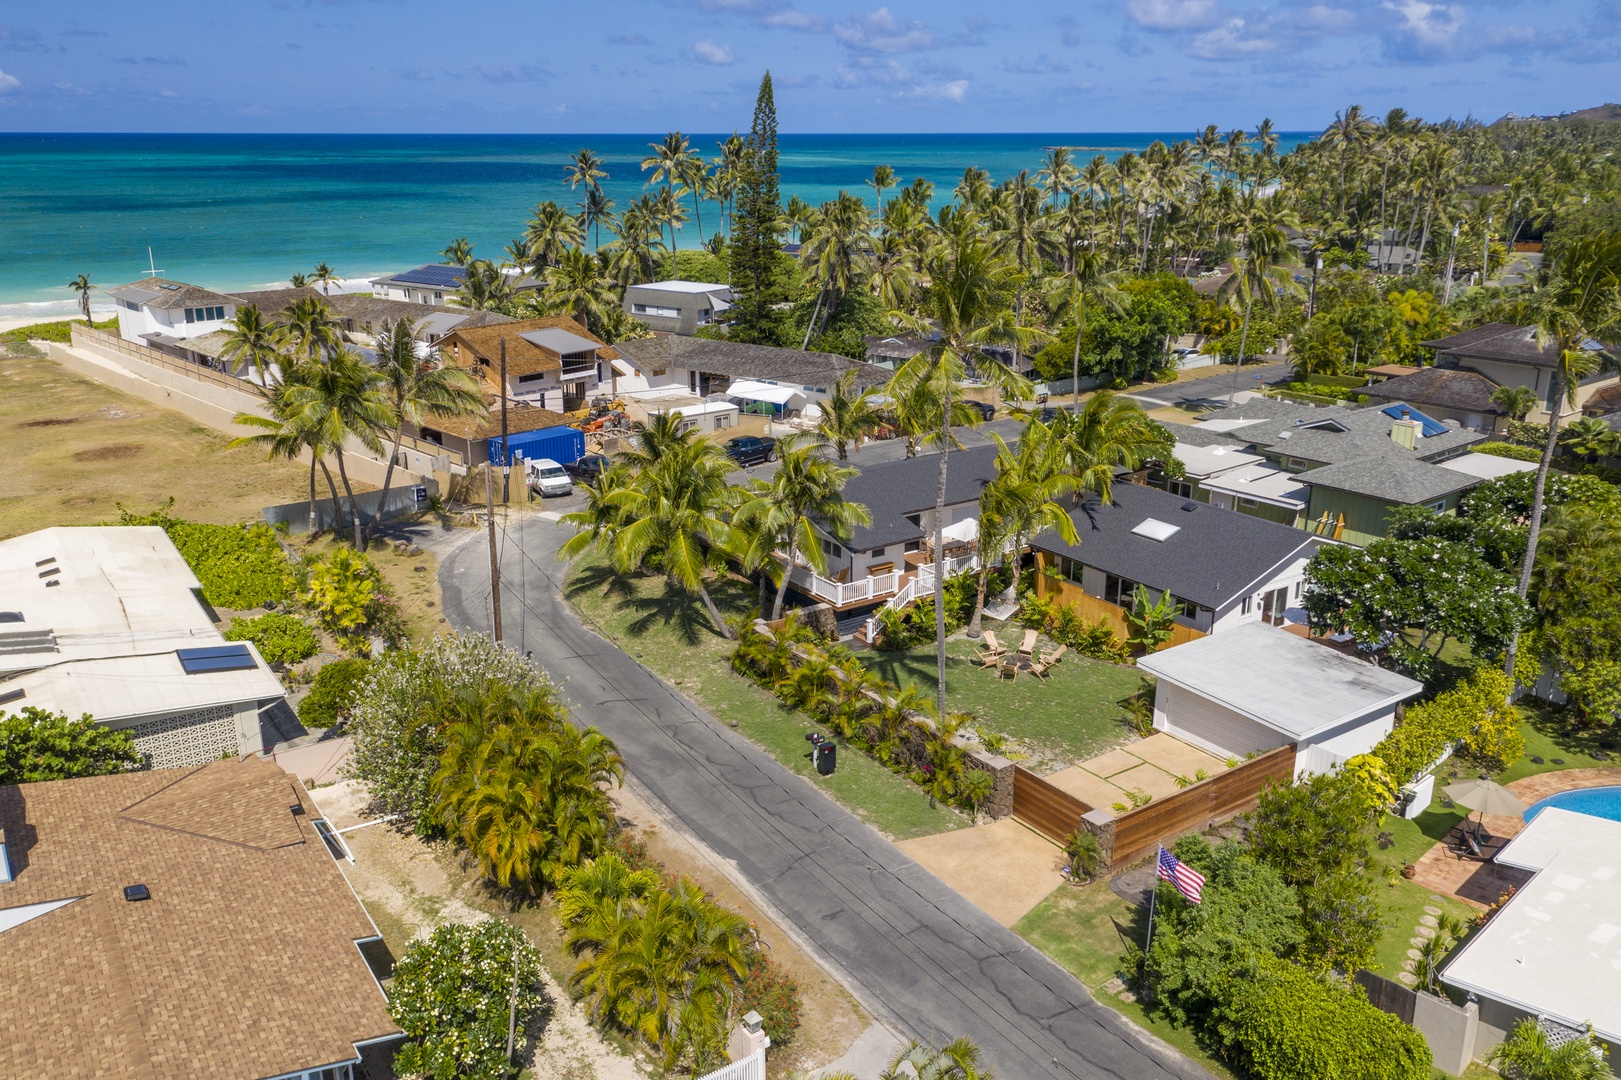 Kailua Vacation Rentals, Ranch Beach House - Elevated Corner Lot Maximizes Ocean and Mountain Views